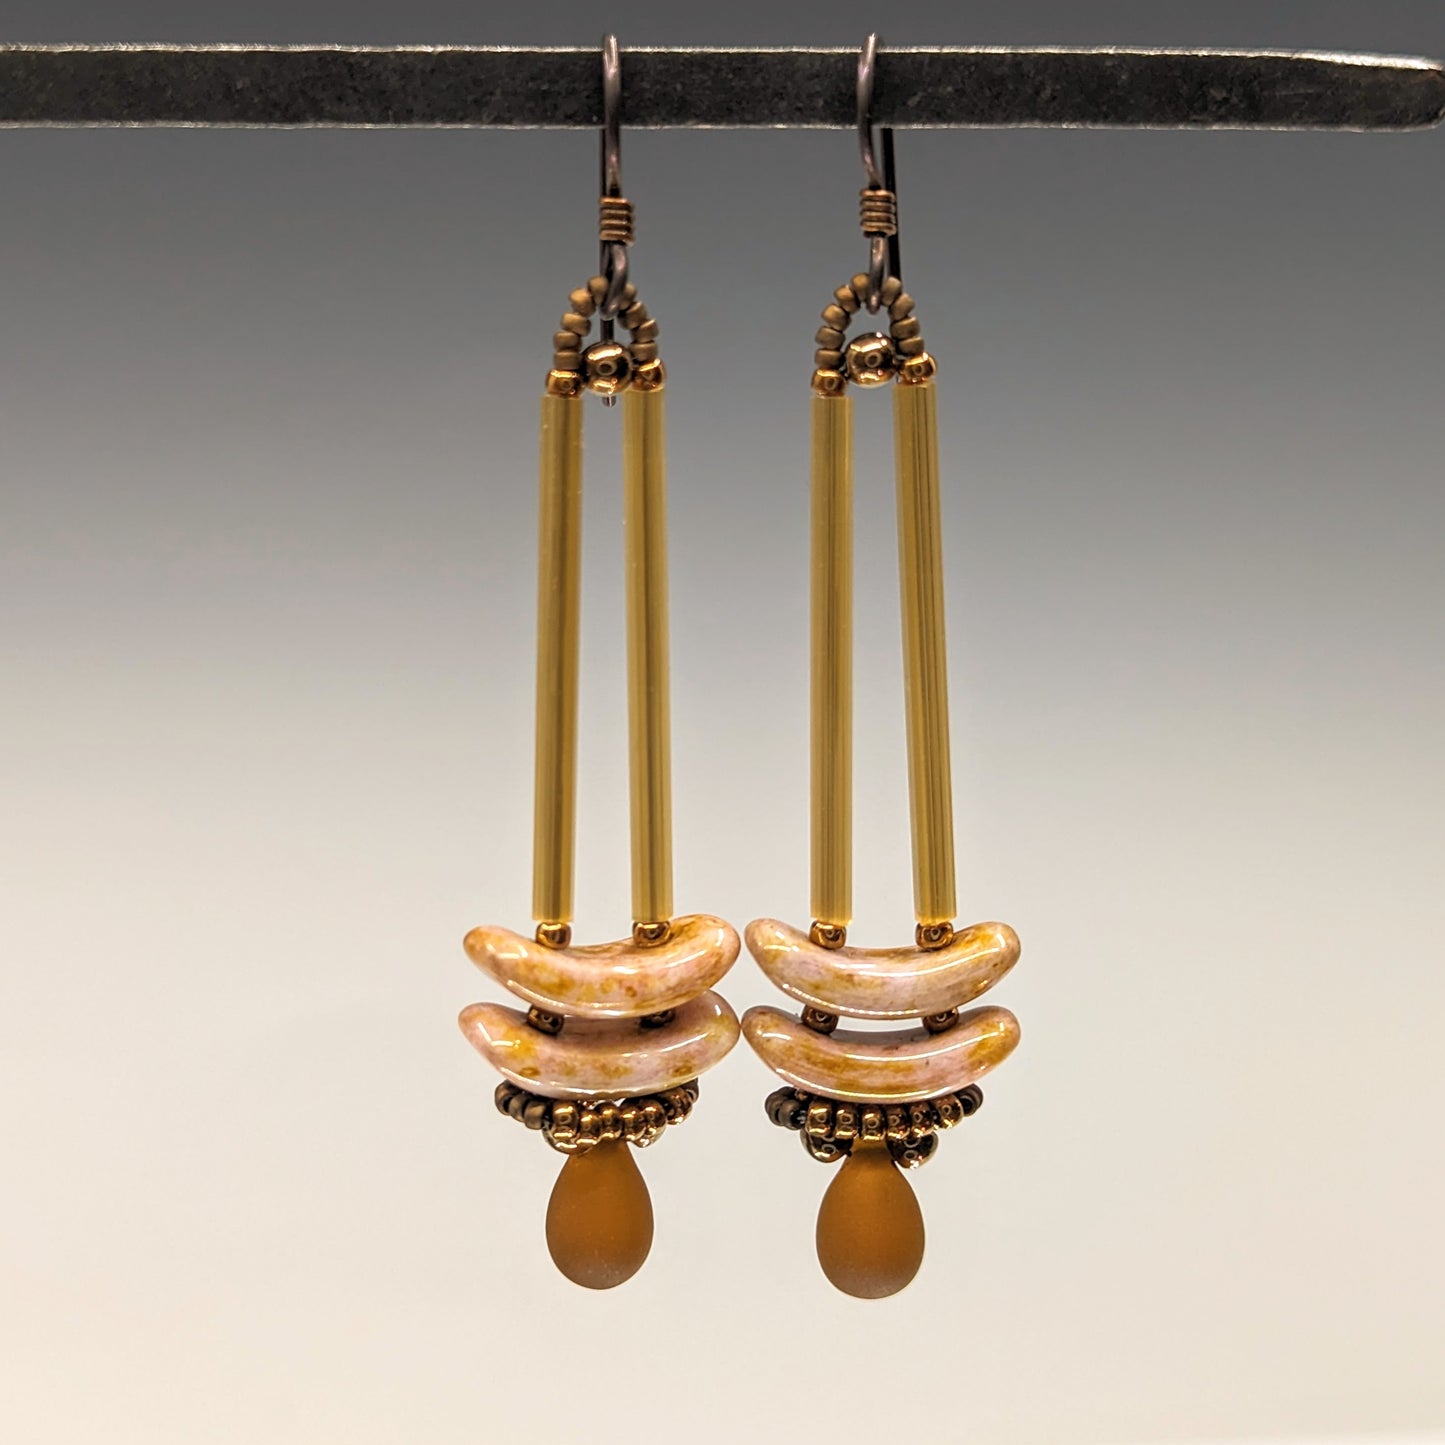 Earrings that look similar to a medicine dropper hang from  a black bar. There are two long, brown beads forming narrow vertical columns ending at the top of two speckled pink stacked arc shaped beads. At the bottom is a matte amber  drop shaped bead, surrounded by a belt of gold seed beads.